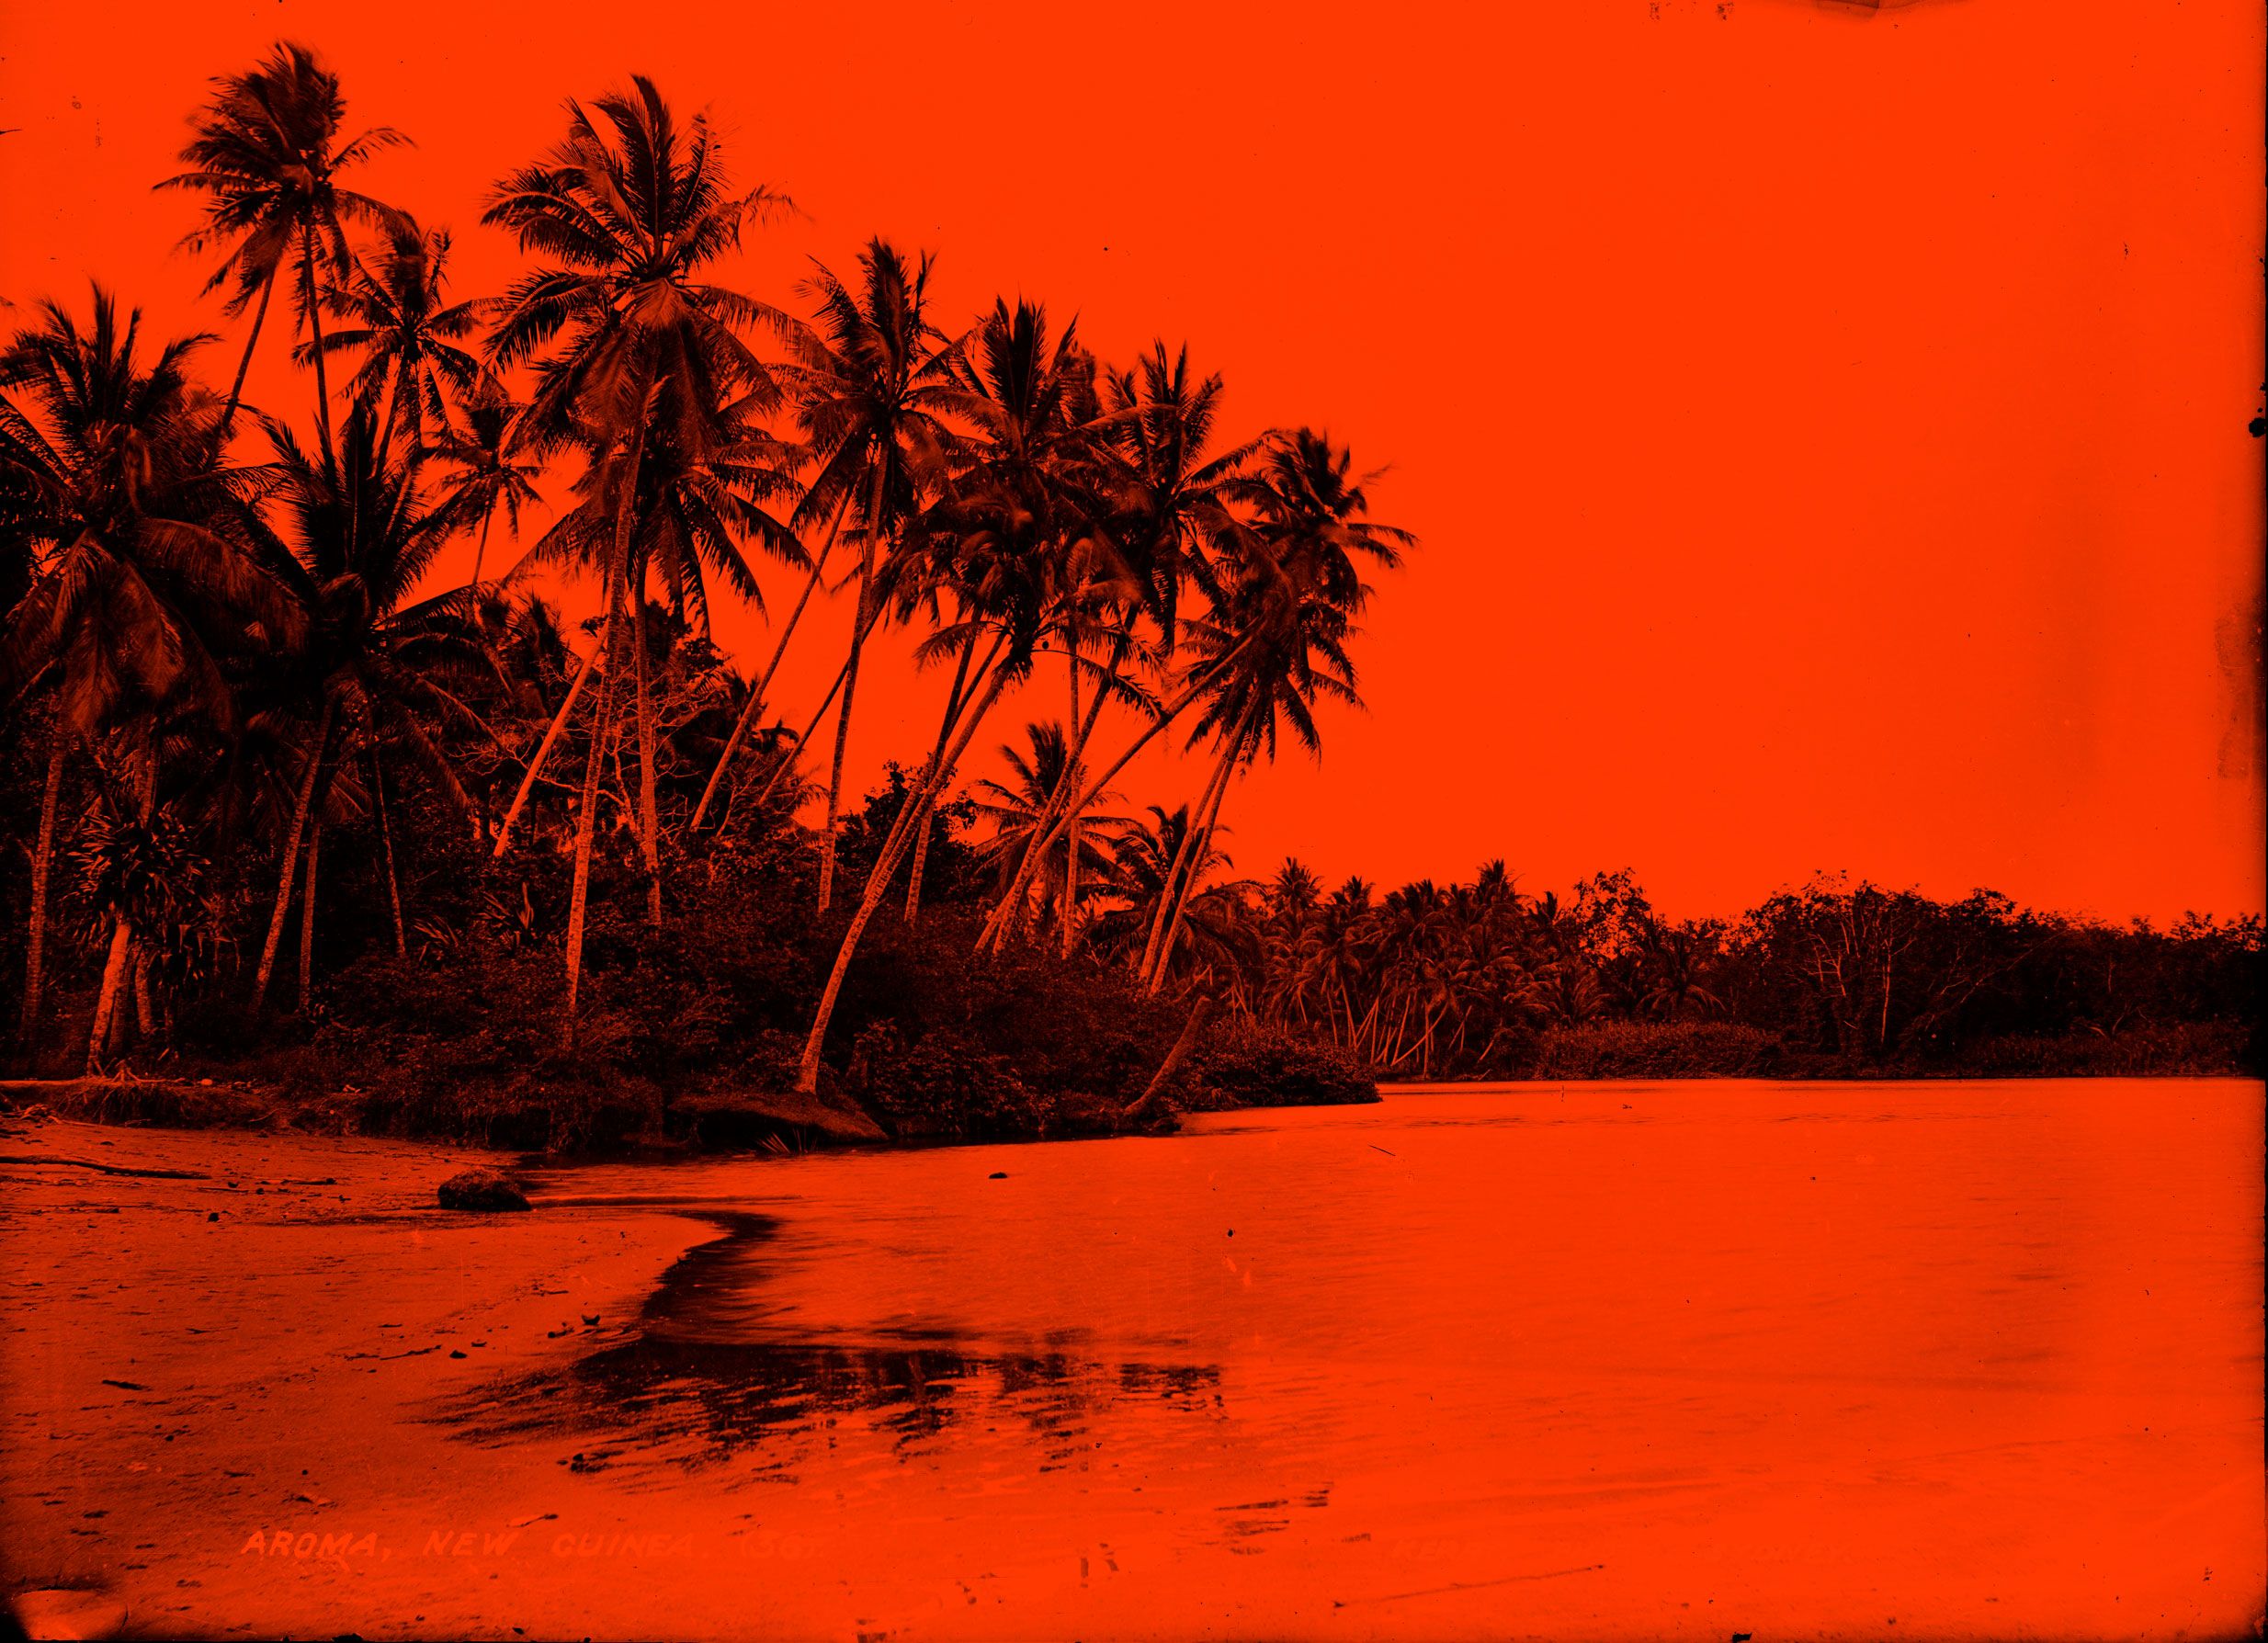 A photograph of a beach with palmtrees, tinted red.